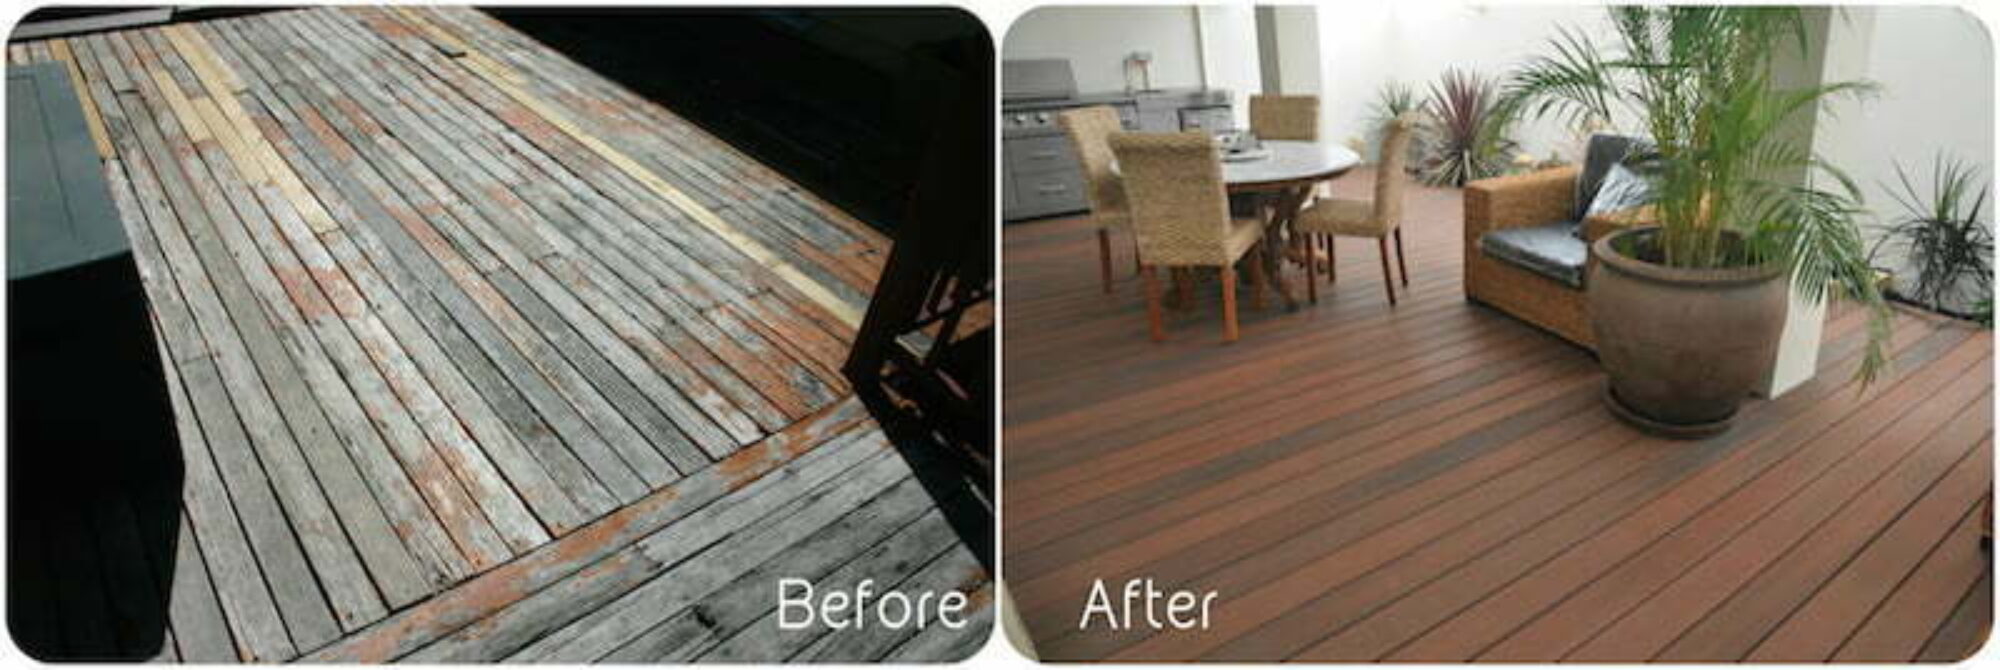 Advantages of Capped Composite Decking over Wood Decking